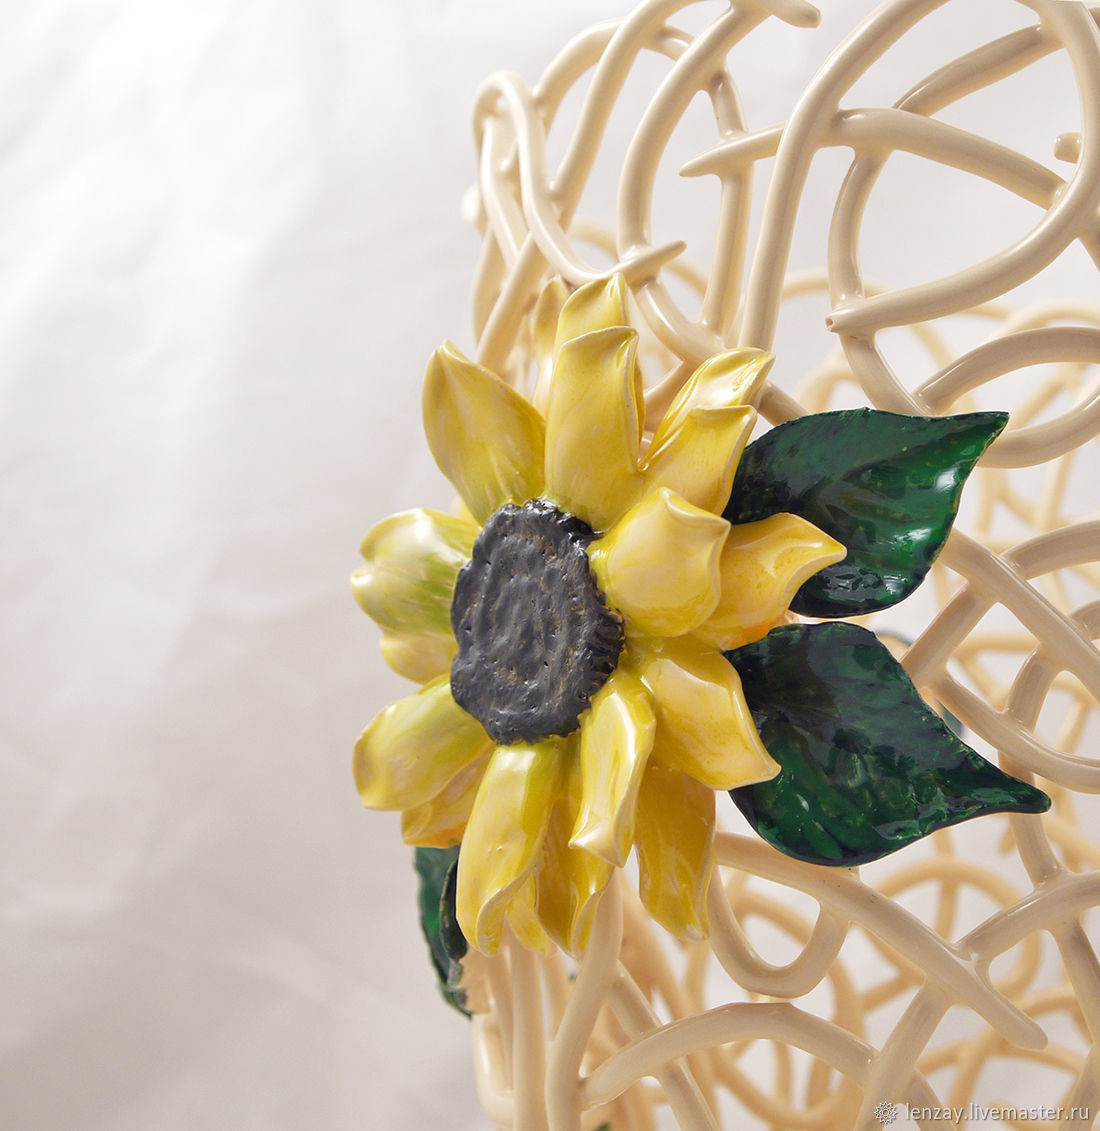 18 Trendy Vase Of Sunflowers 2024 free download vase of sunflowers of wicker vase sunflower cone height 25 cm shop online on within height 25 cm ceramic vase from the collection of sunflowers truncated cone